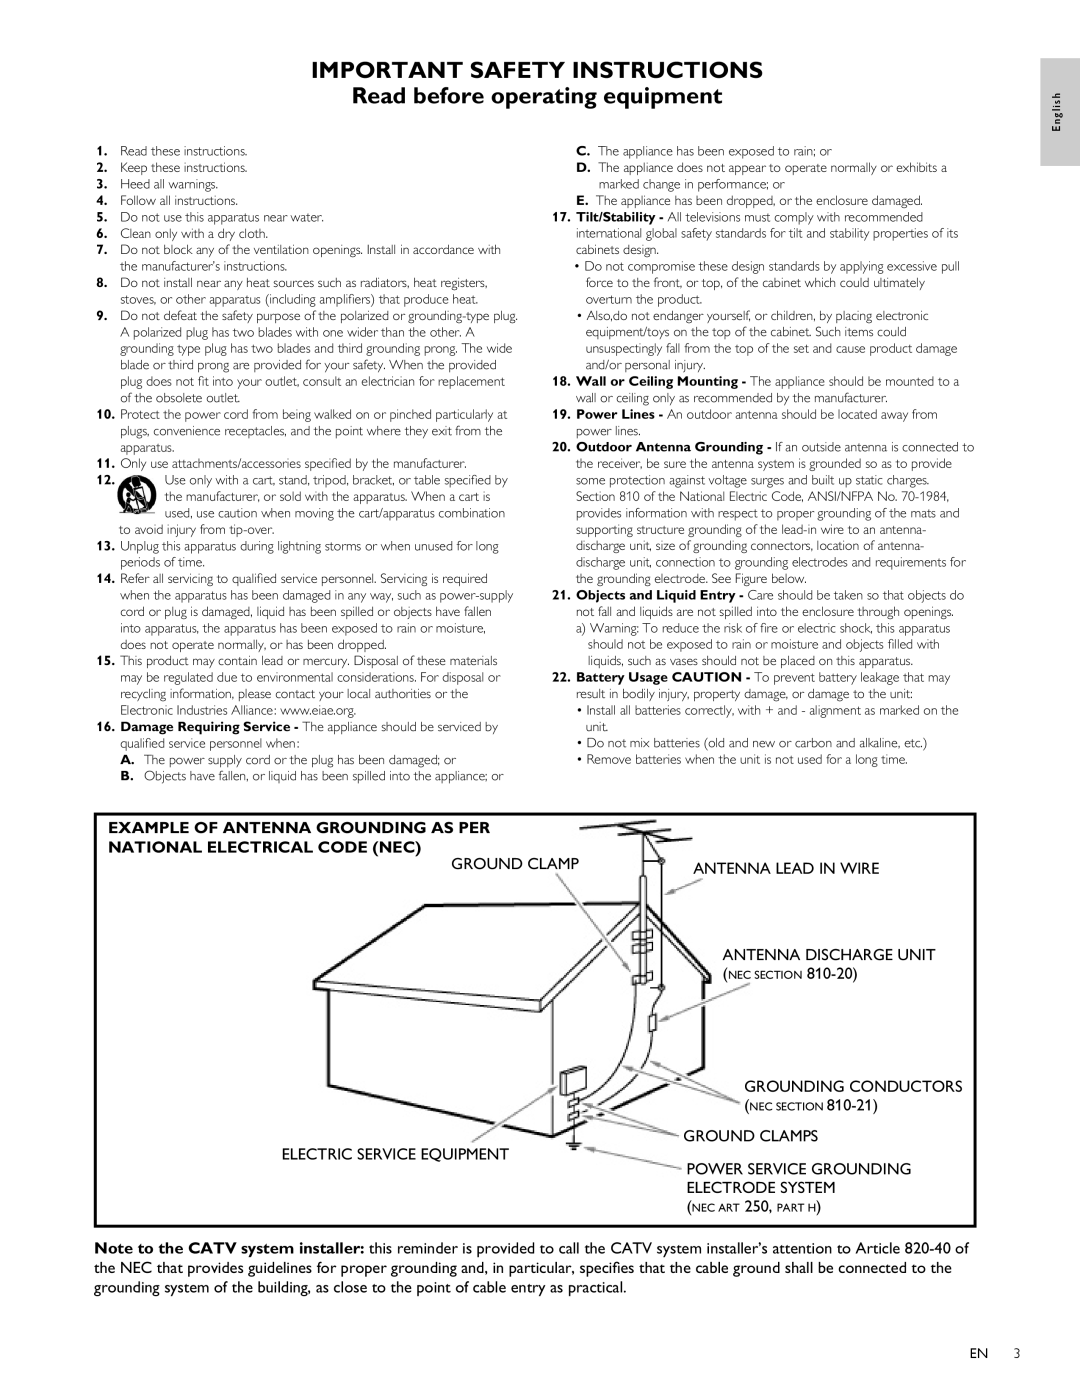 Philips 40PFL3505D IMPORTANT SAFETY INSTRUCTIONS Read before operating equipment, Power Service Grounding Electrode System 